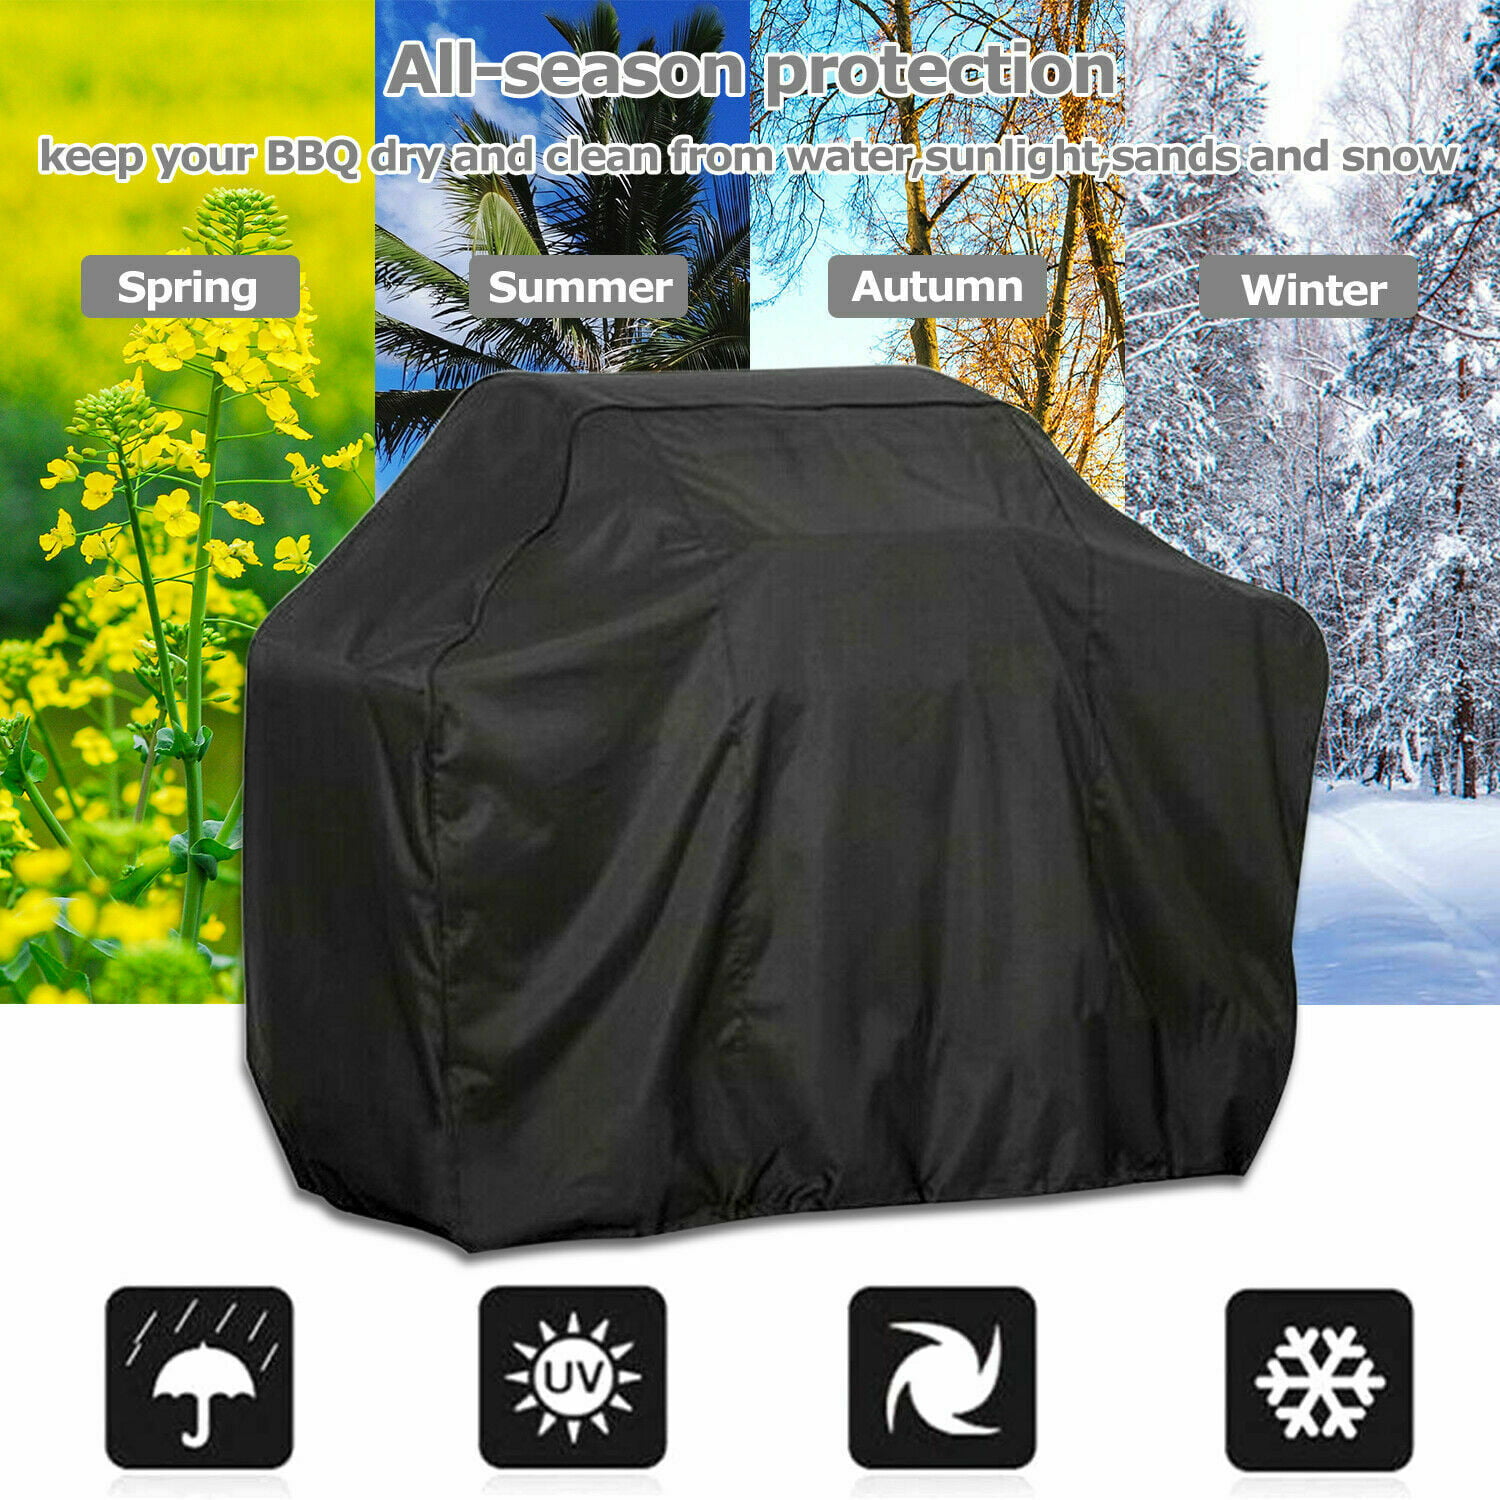 Details about   ,Round BBQ Gas Grill Cover Barbecue Waterproof Outdoor Heavy Duty ProtectionUS 